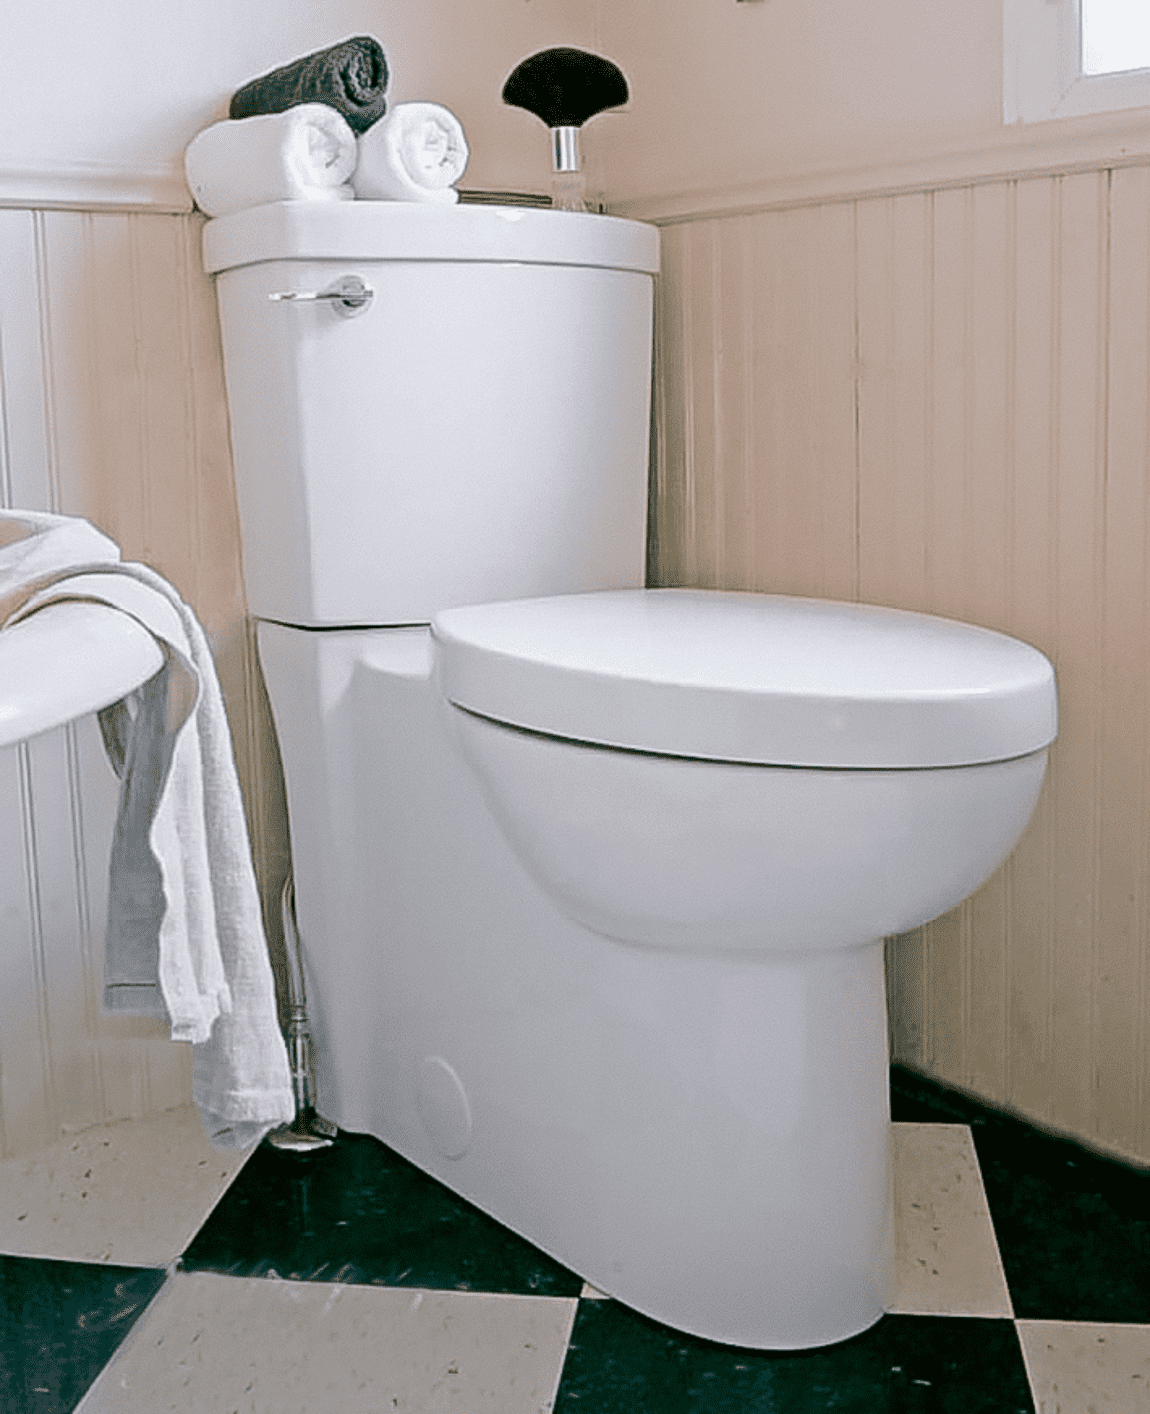 What's To Love And What's To Hate About Wall-Mounted Toilets?